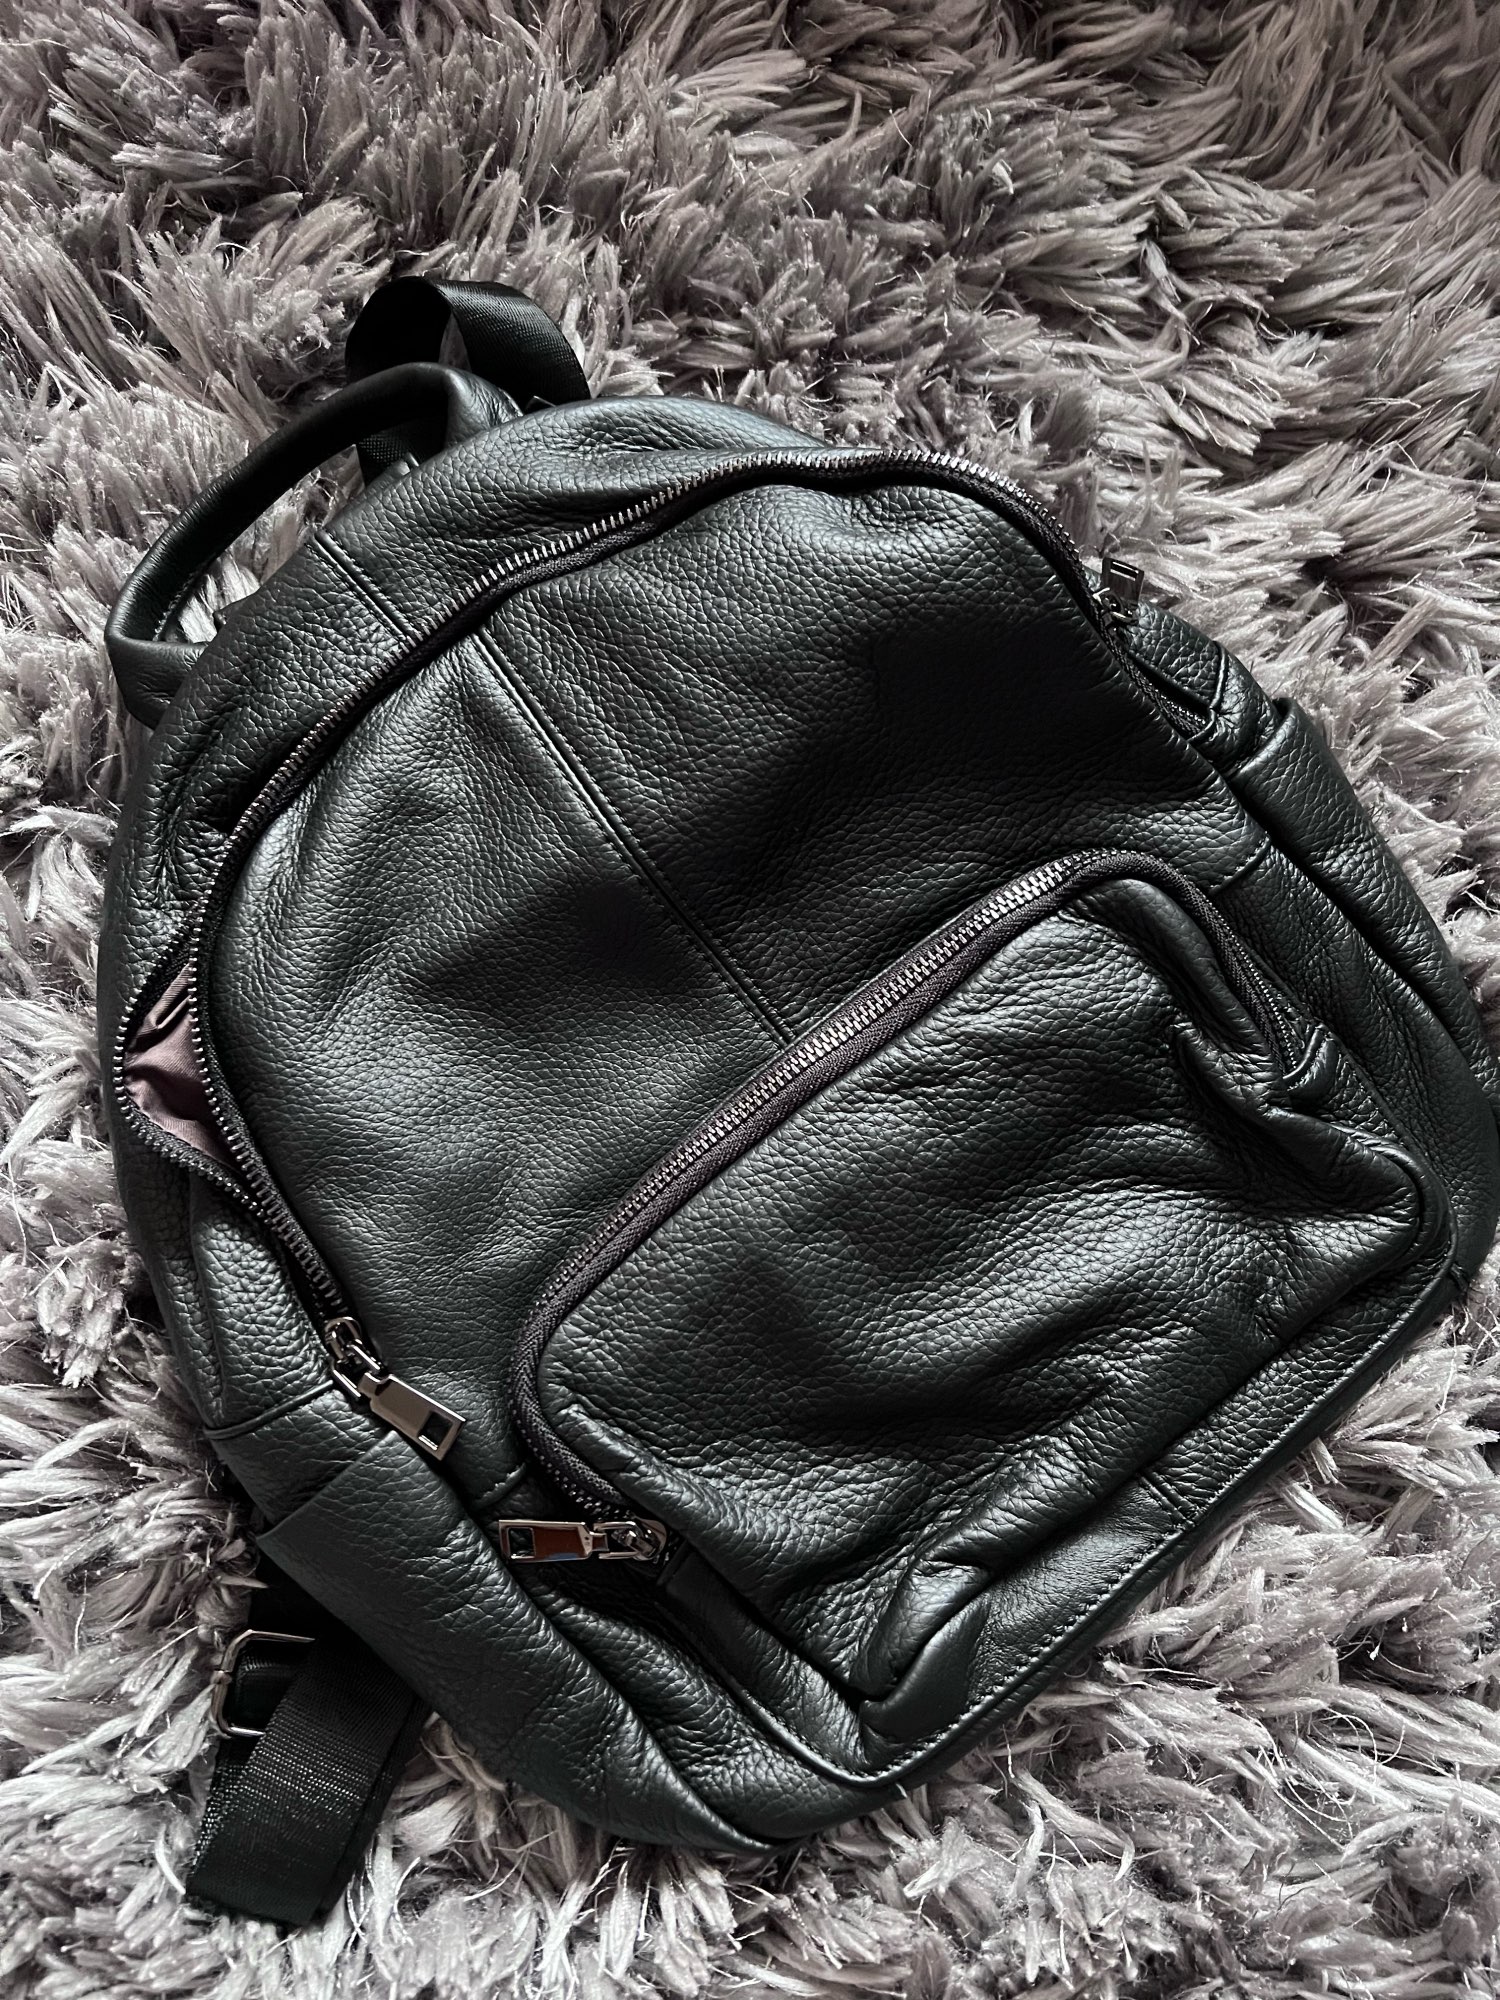 Genuine Leather Backpack: Versatile, Durable, and Stylish photo review